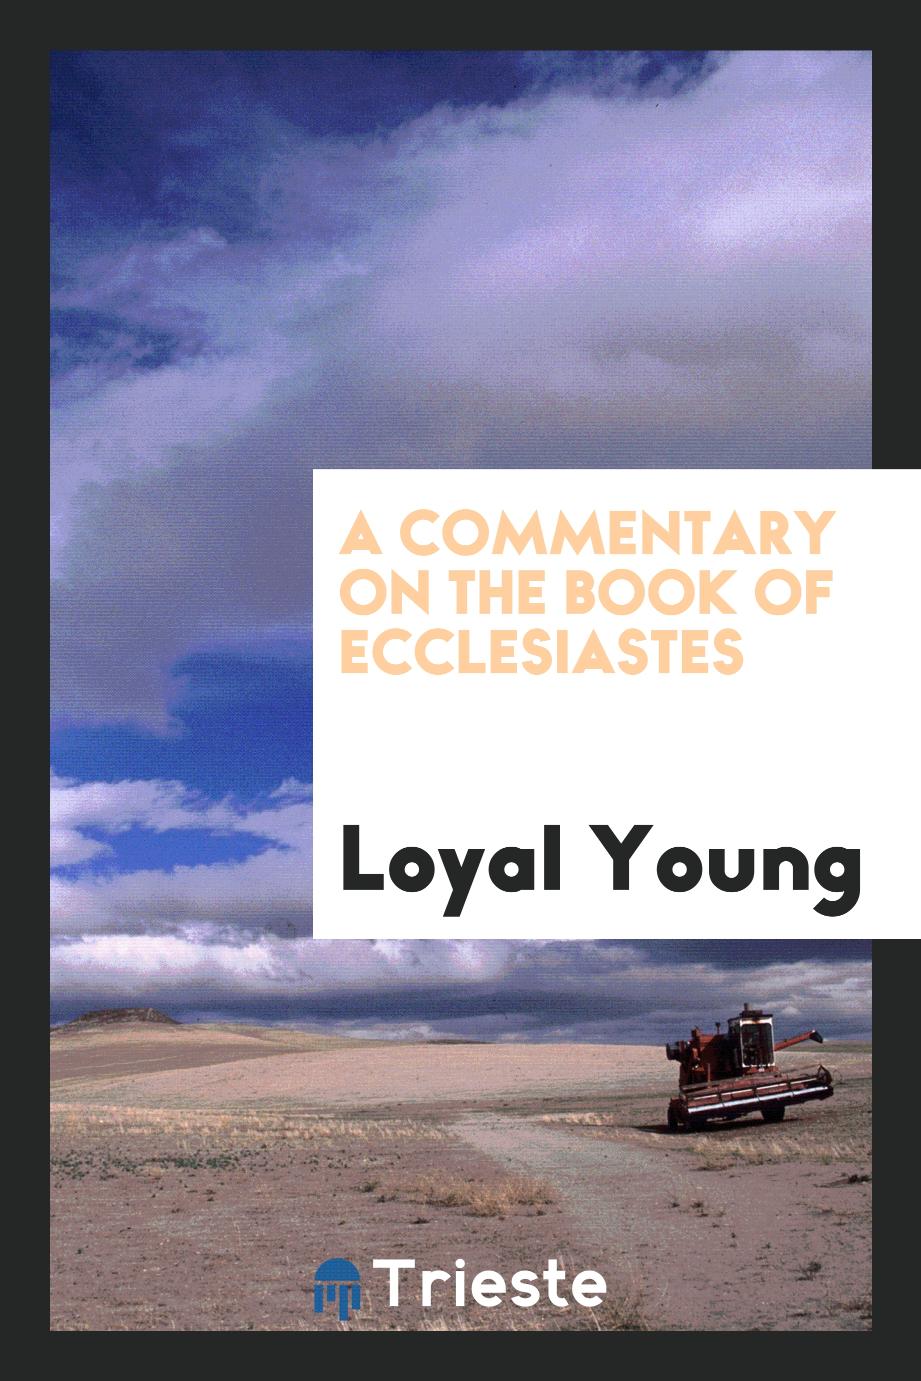 A commentary on the Book of Ecclesiastes